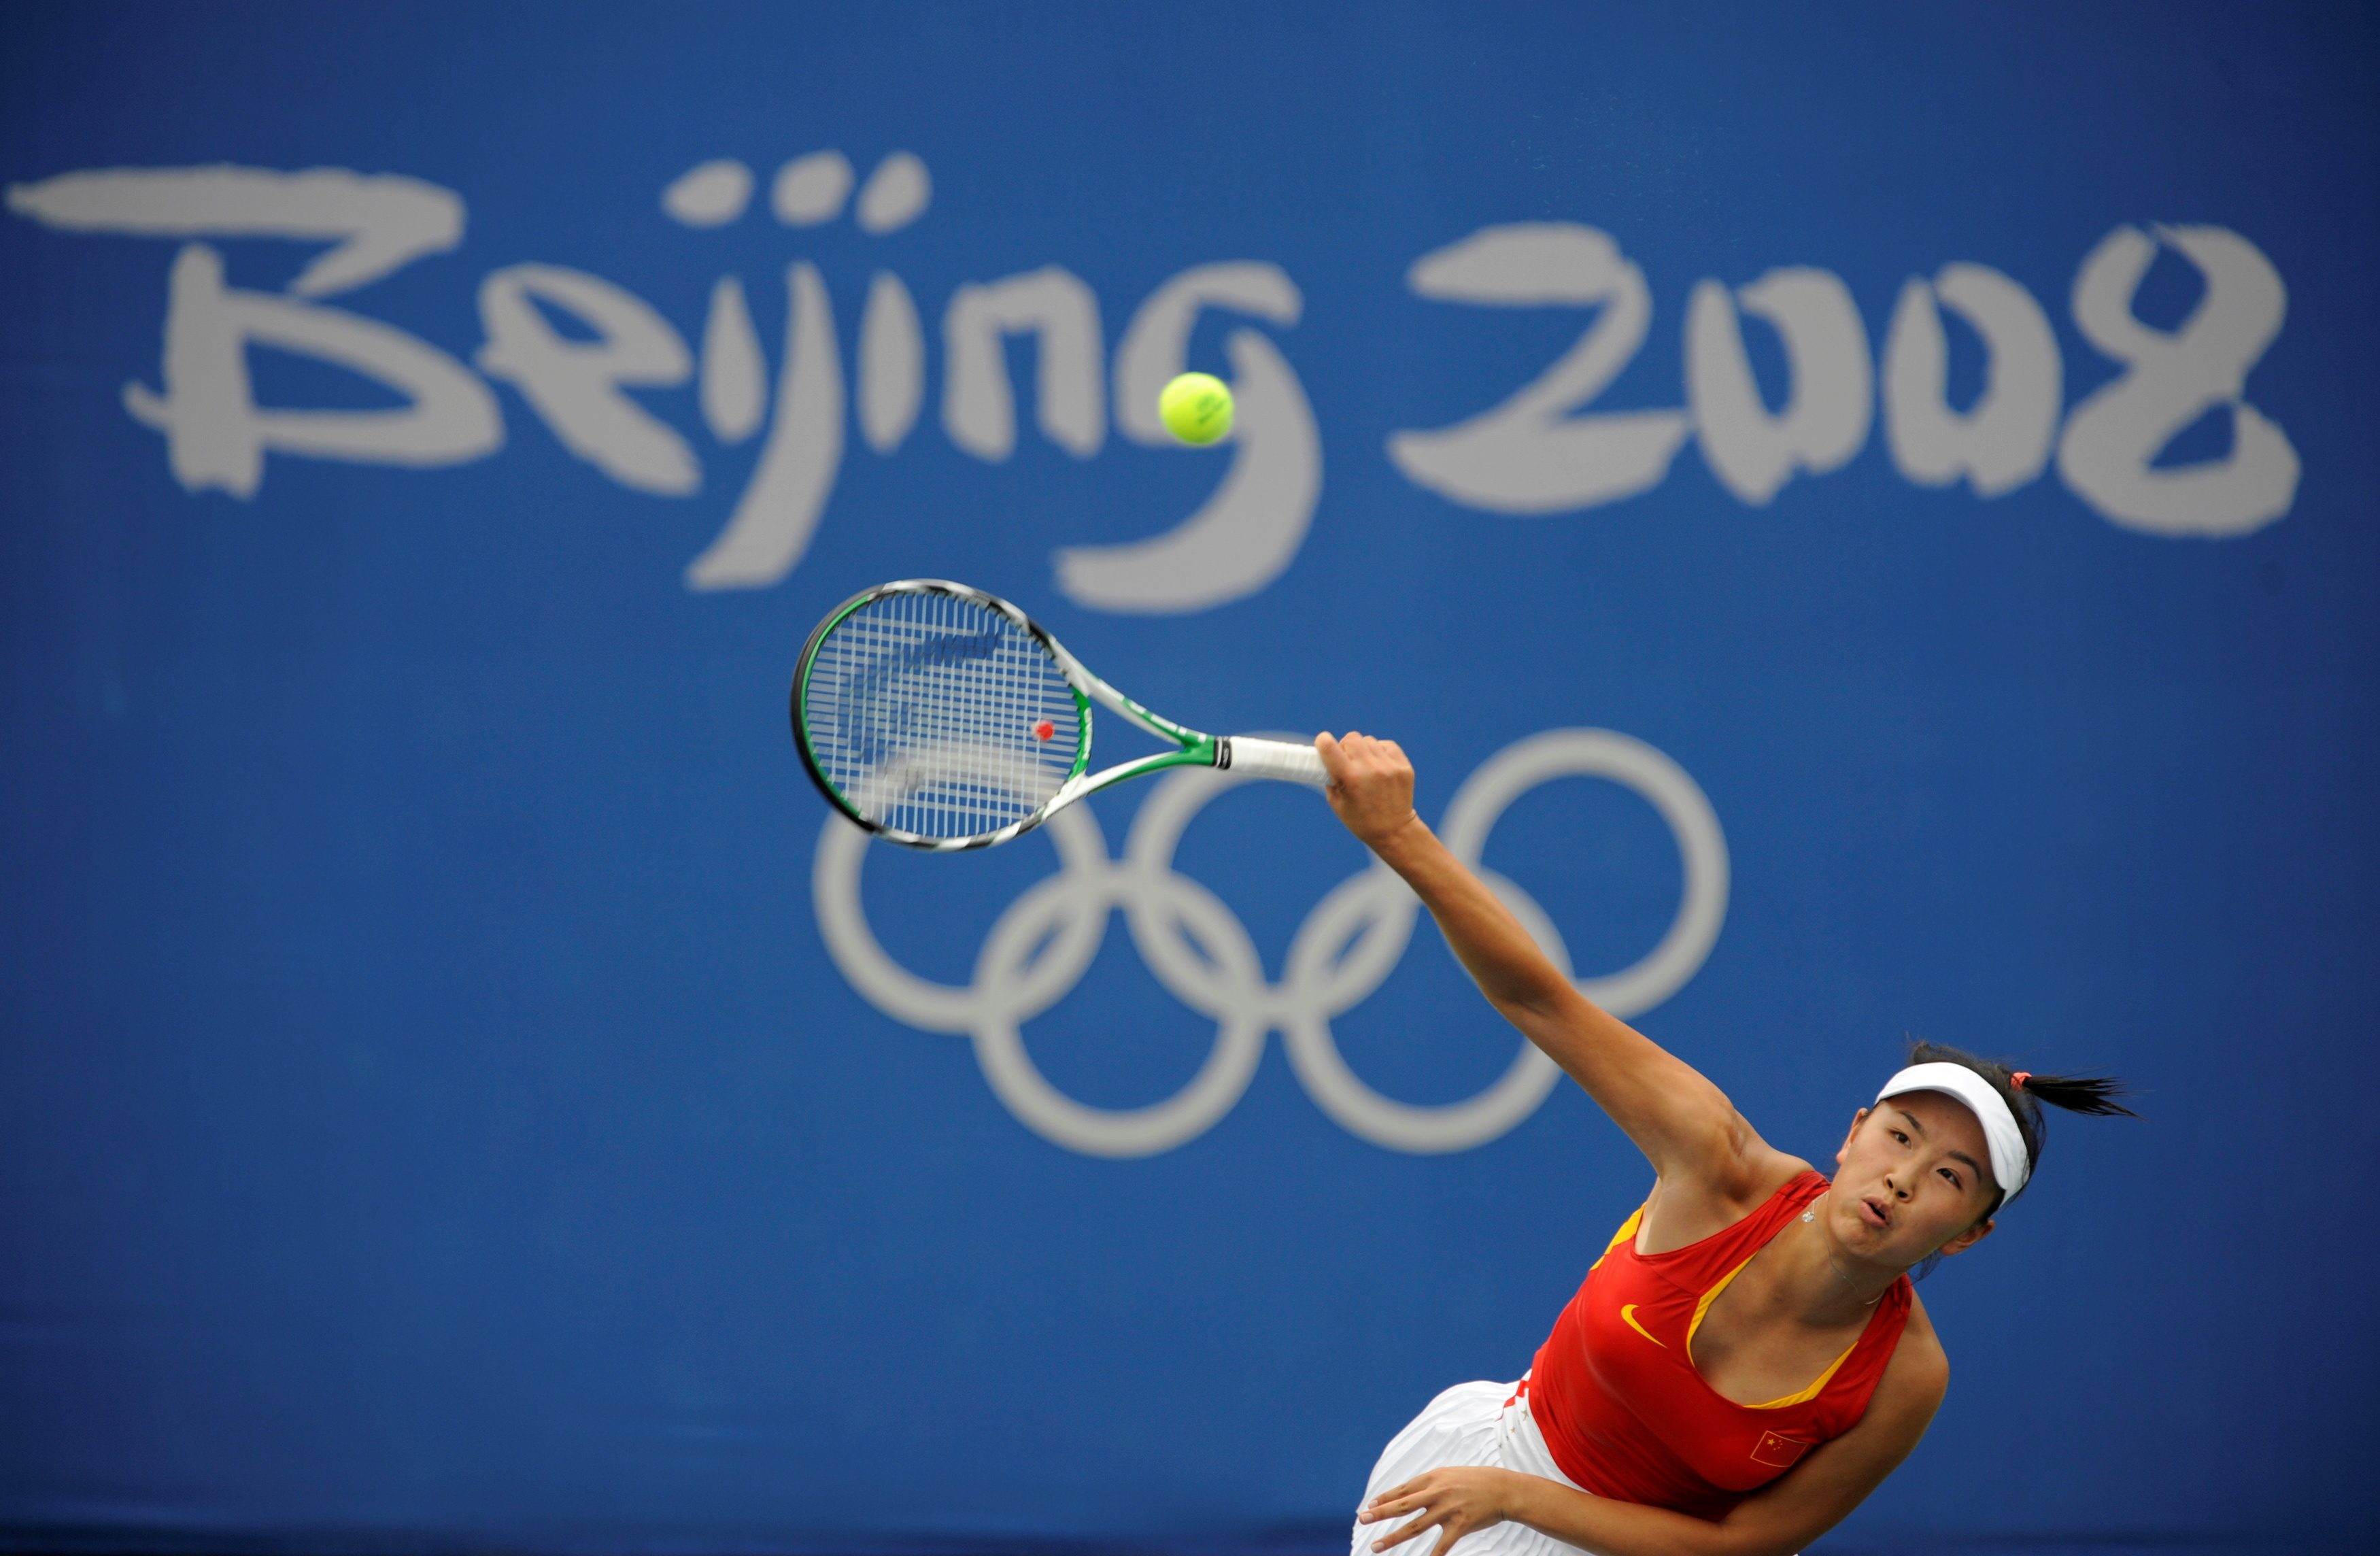 China urges ‘certain people’ to stop ‘politicization’ of Peng Shuai situation